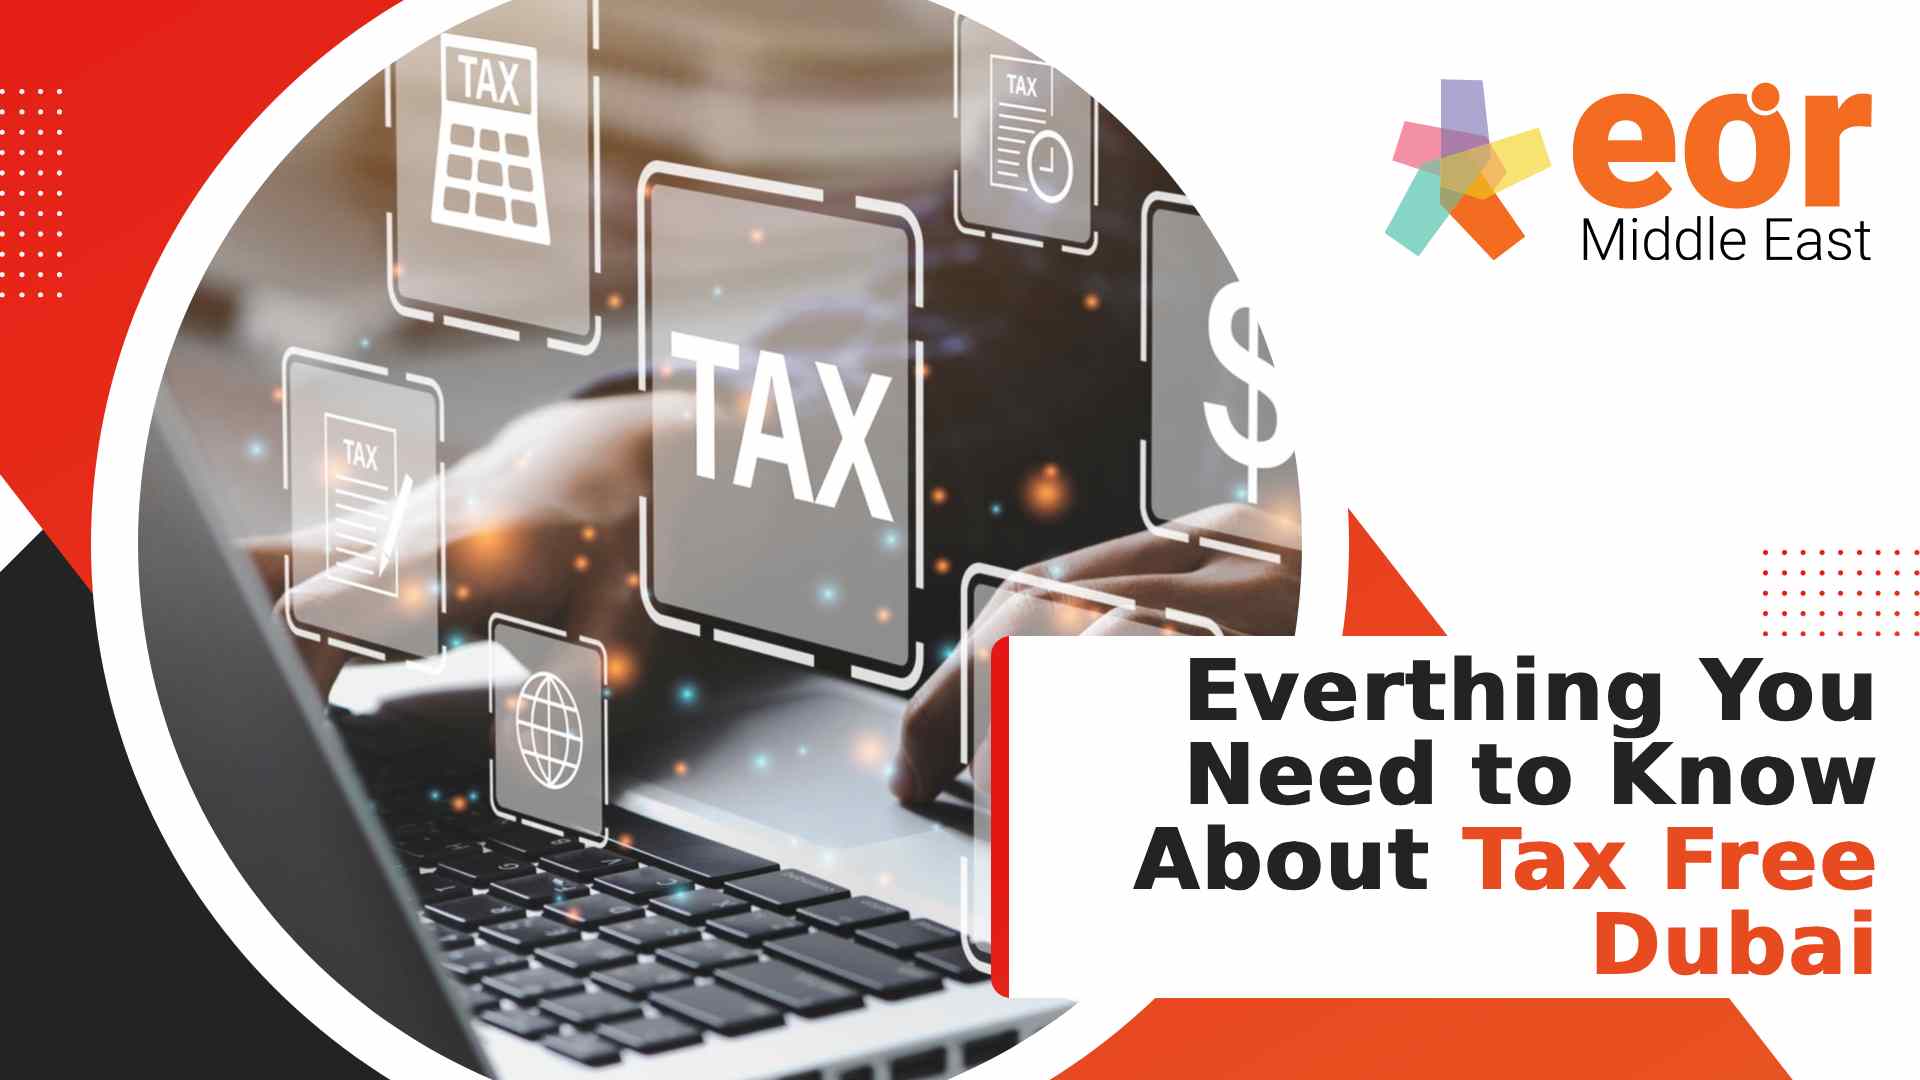 Everthing You Need to Know About Tax Free Dubai